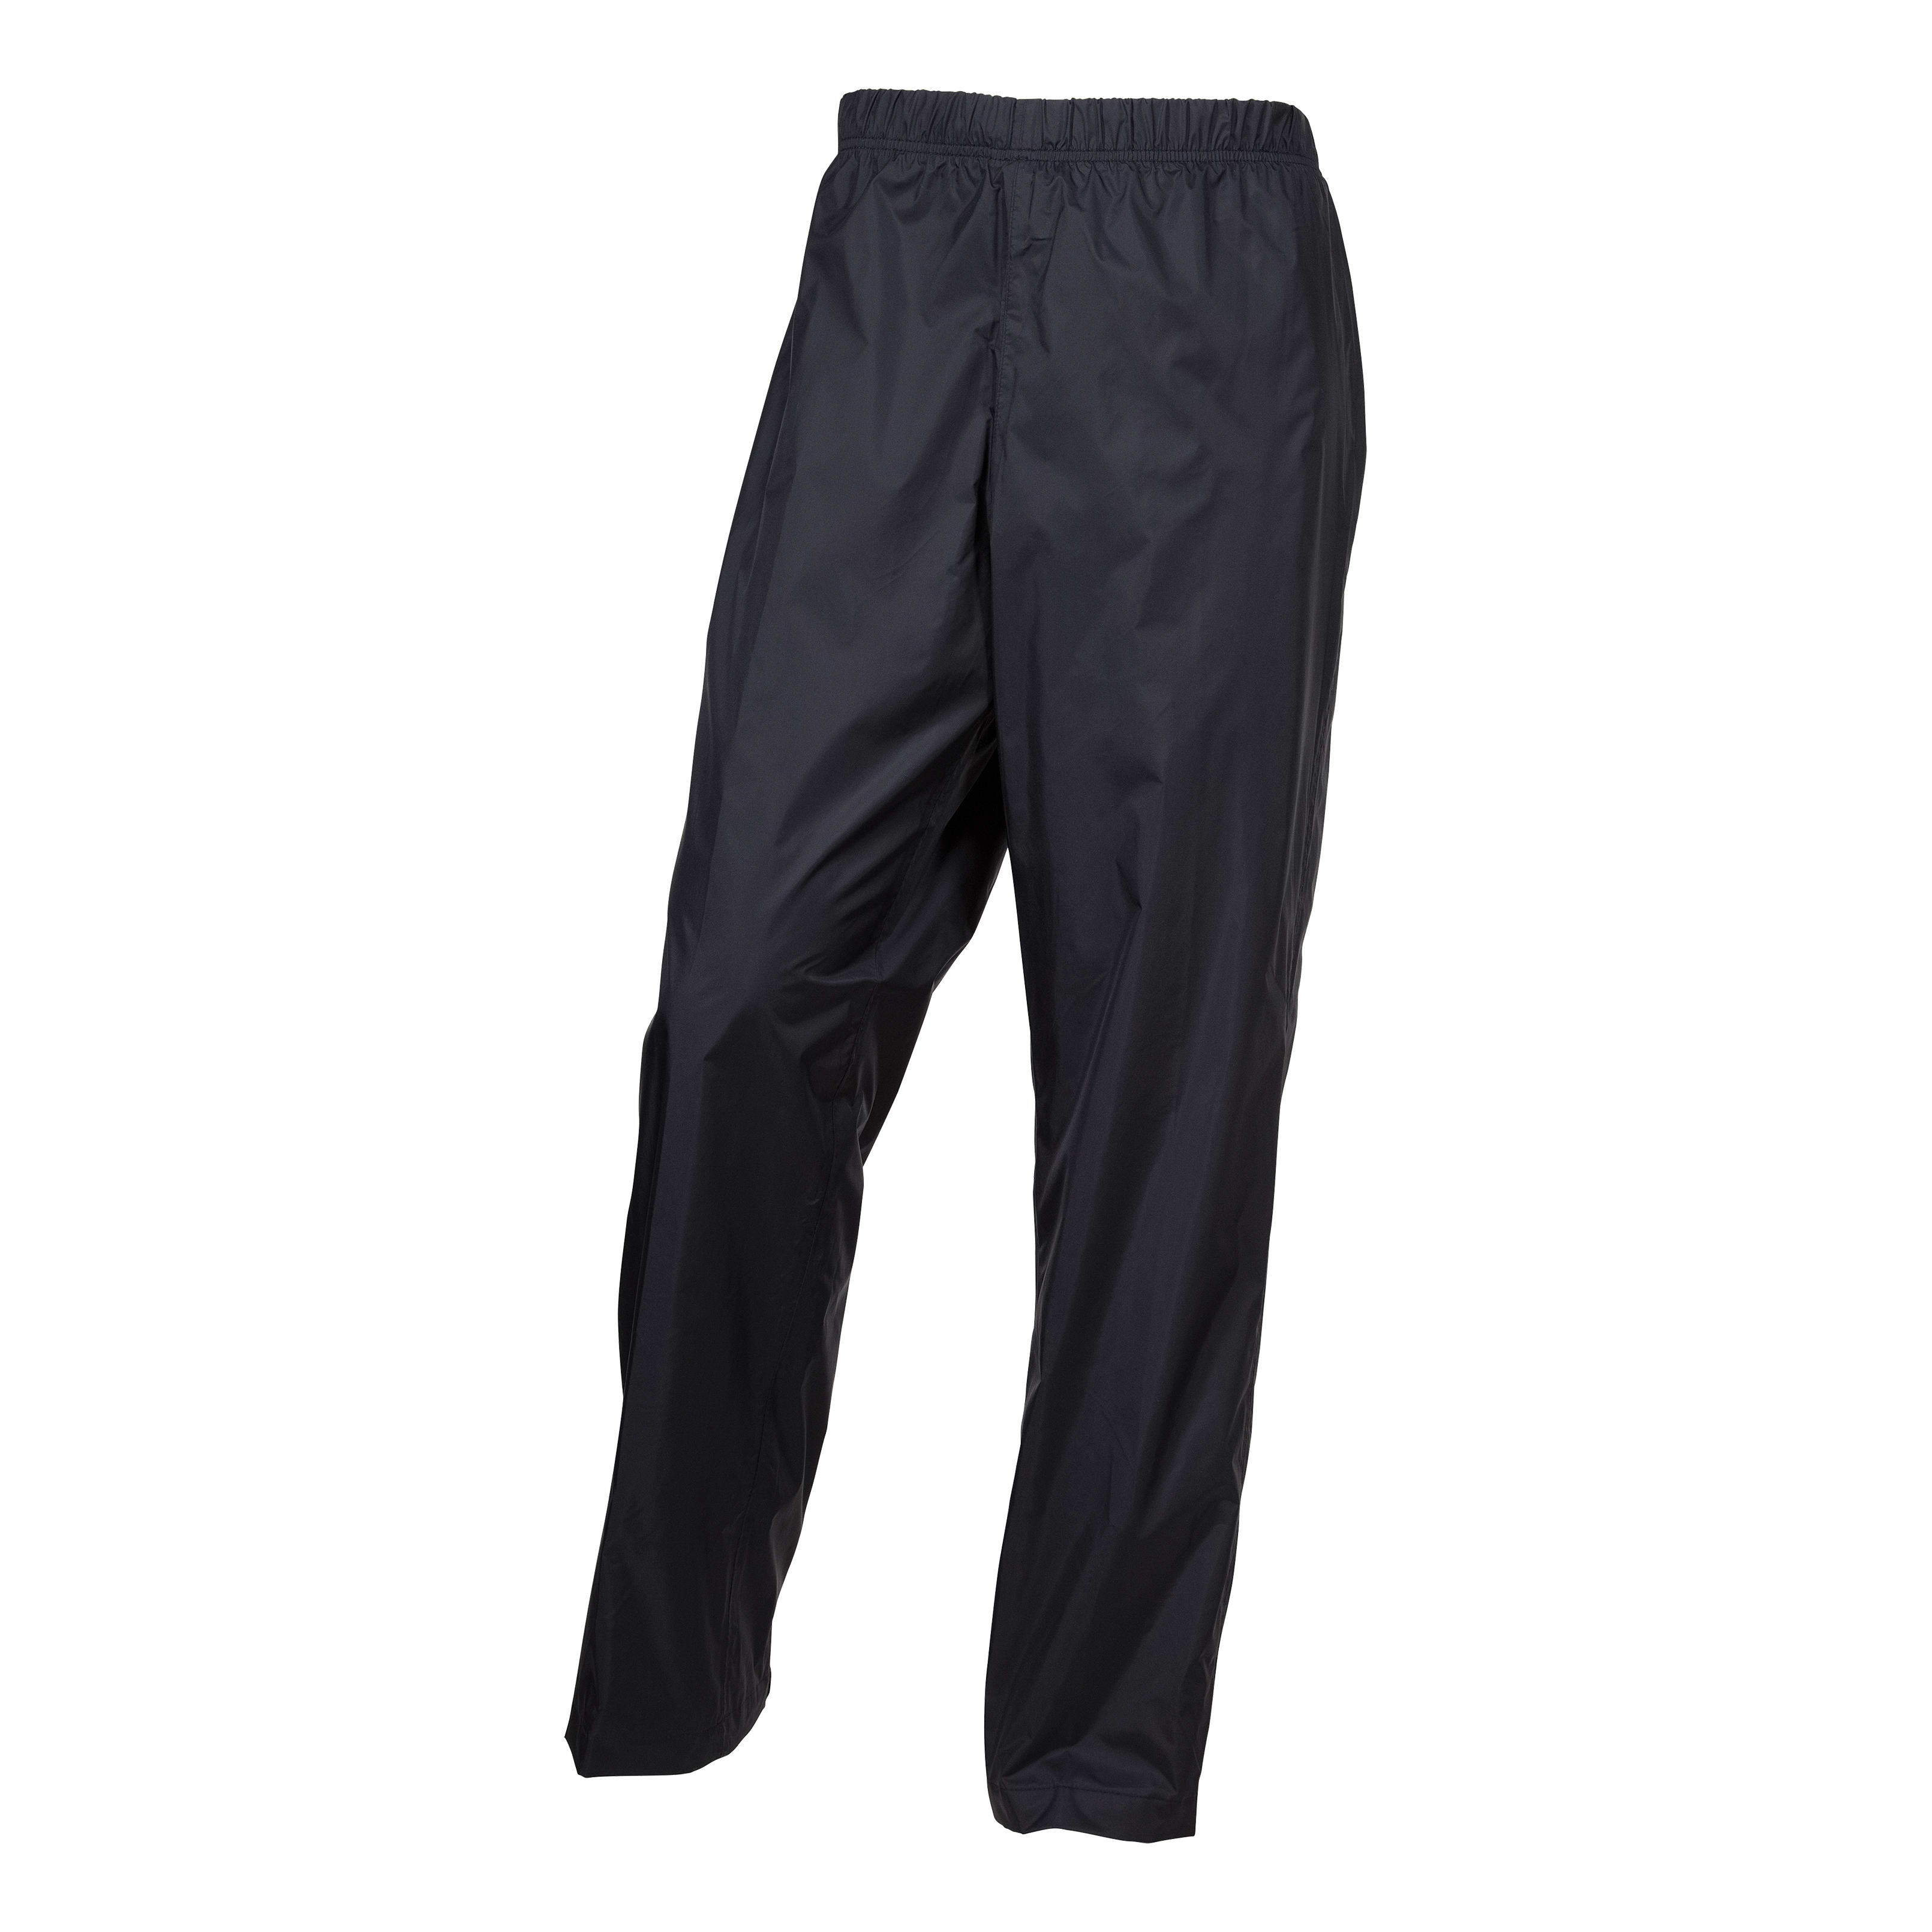 Guidewear® Men’s Rain Stopper Pants with 4MOST® REPEL™